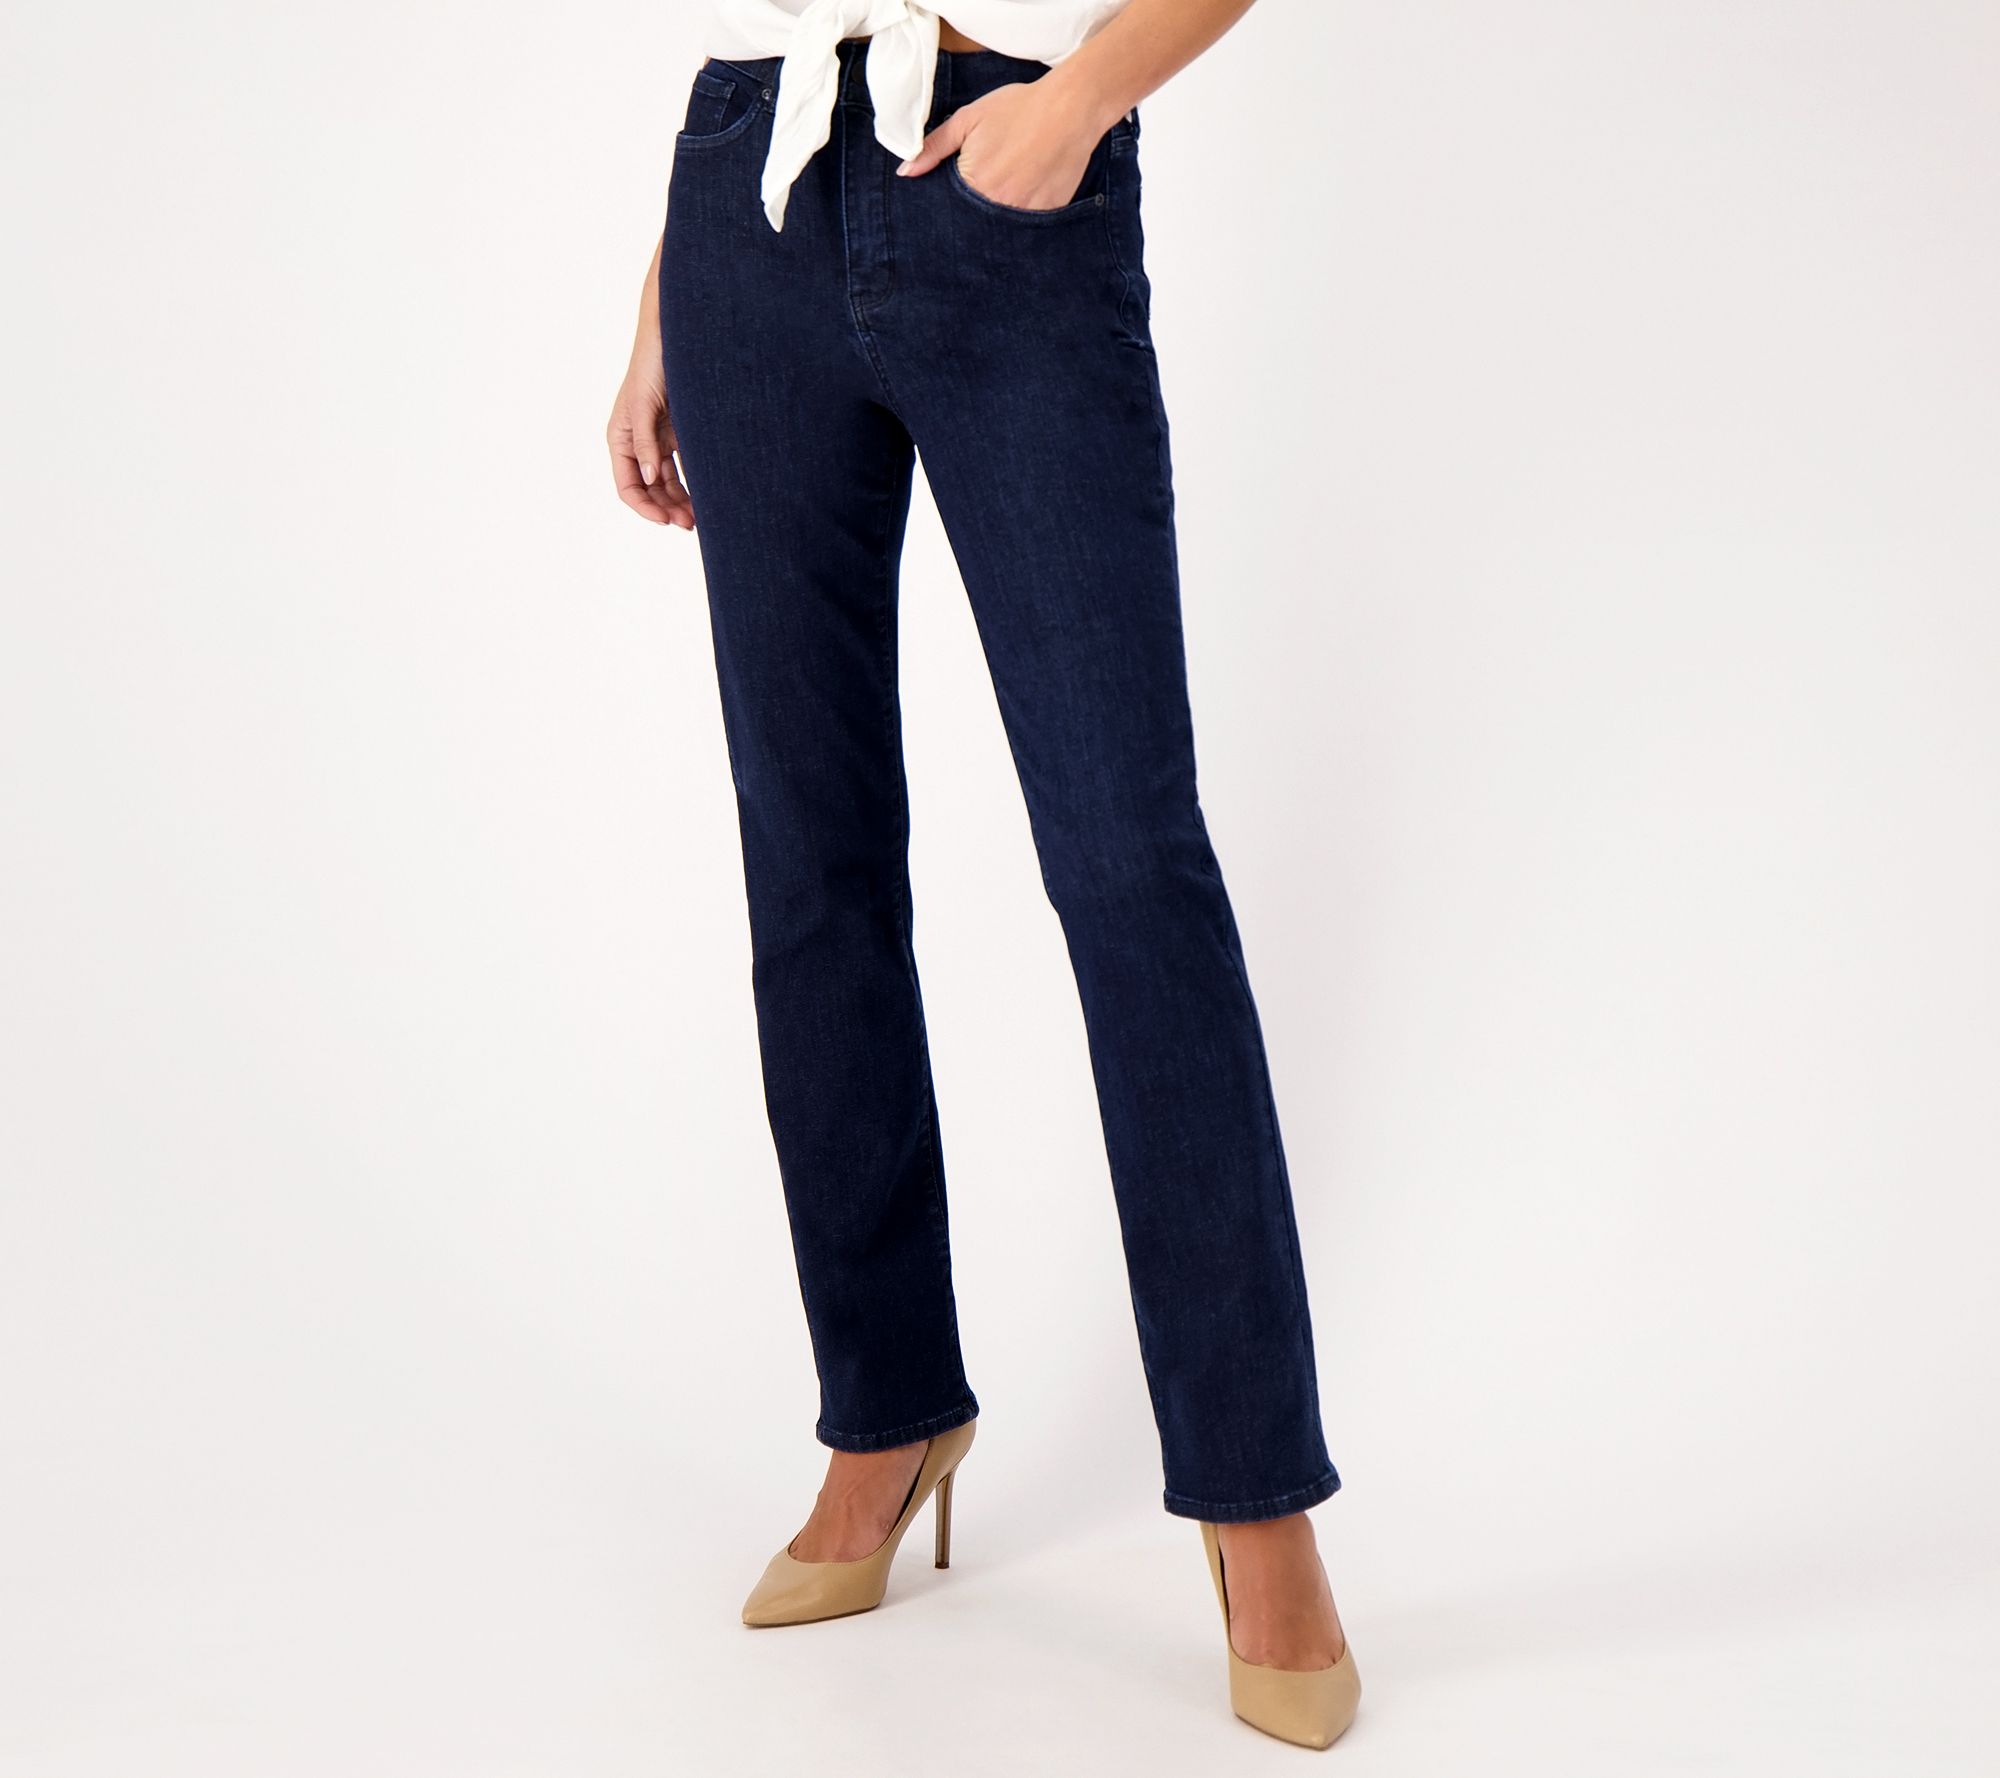 NYDJ Curve Shaper Marilyn Straight Jeans- Melville 